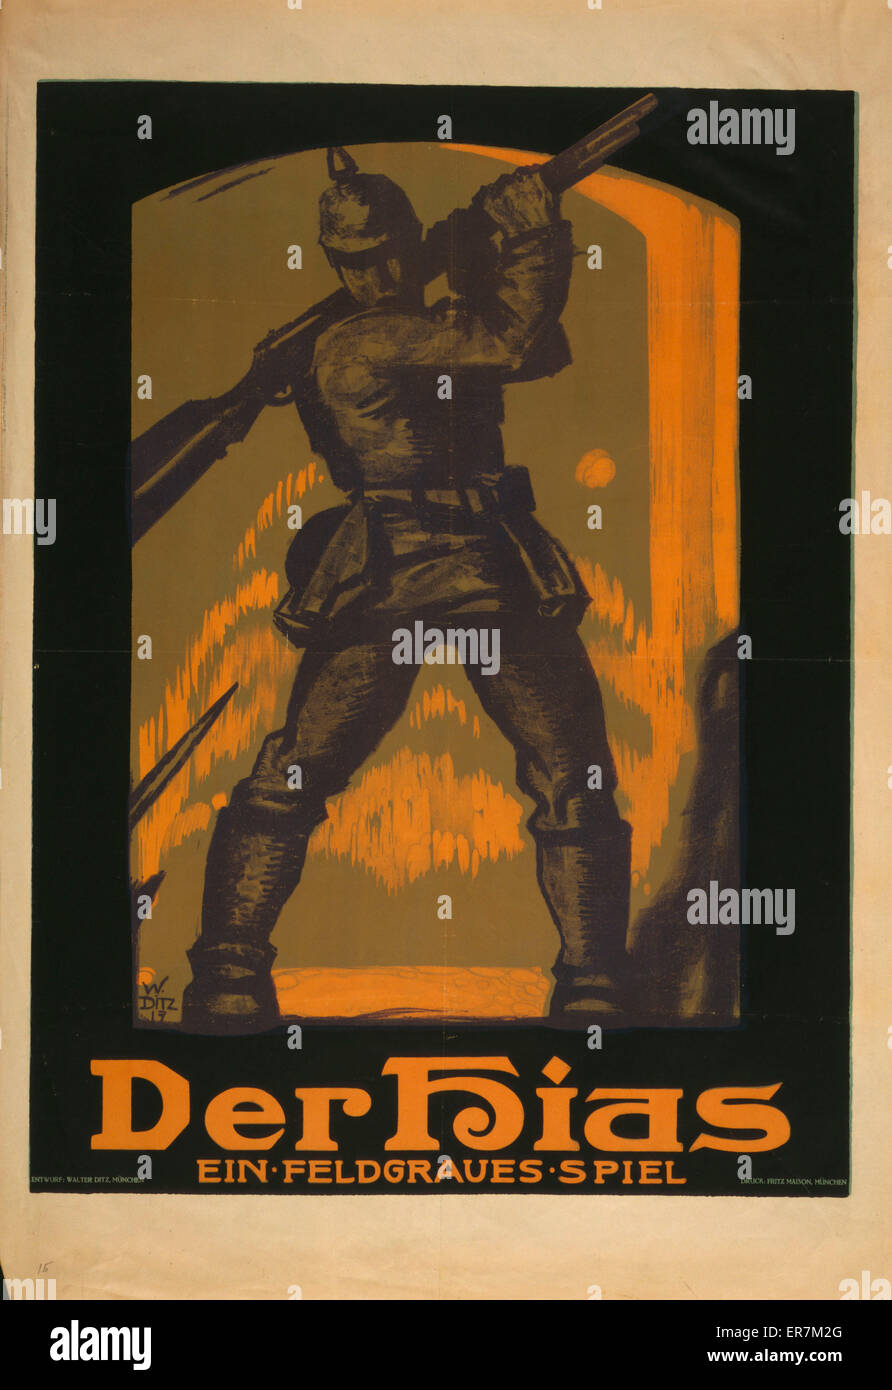 Der Hias, ein feldgraues Spiel. Poster shows a German solider holding his rifle over his shoulder like a club; a bayonet appears in the lower left corner. The poster is an advertisement for a popular play by Heinrich Gilardone. Date 1917. Stock Photo